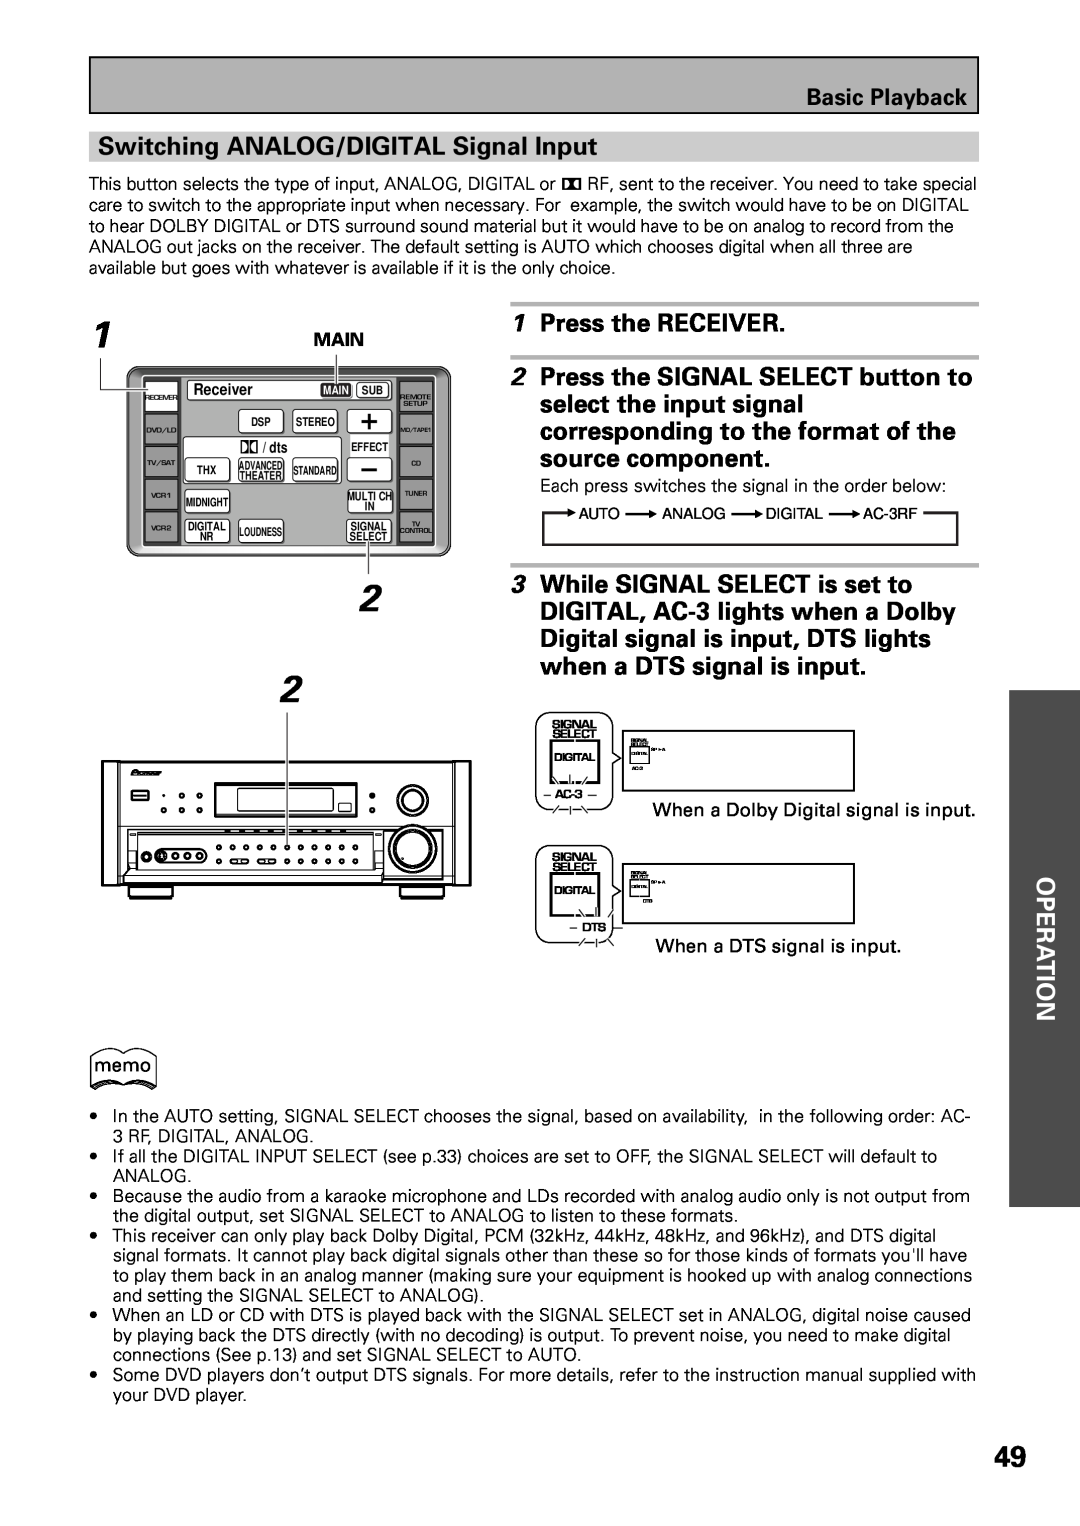 Pioneer VSX-39TX Switching ANALOG/DIGITAL Signal Input, 1Press the RECEIVER, source component, Operation, Basic Playback 